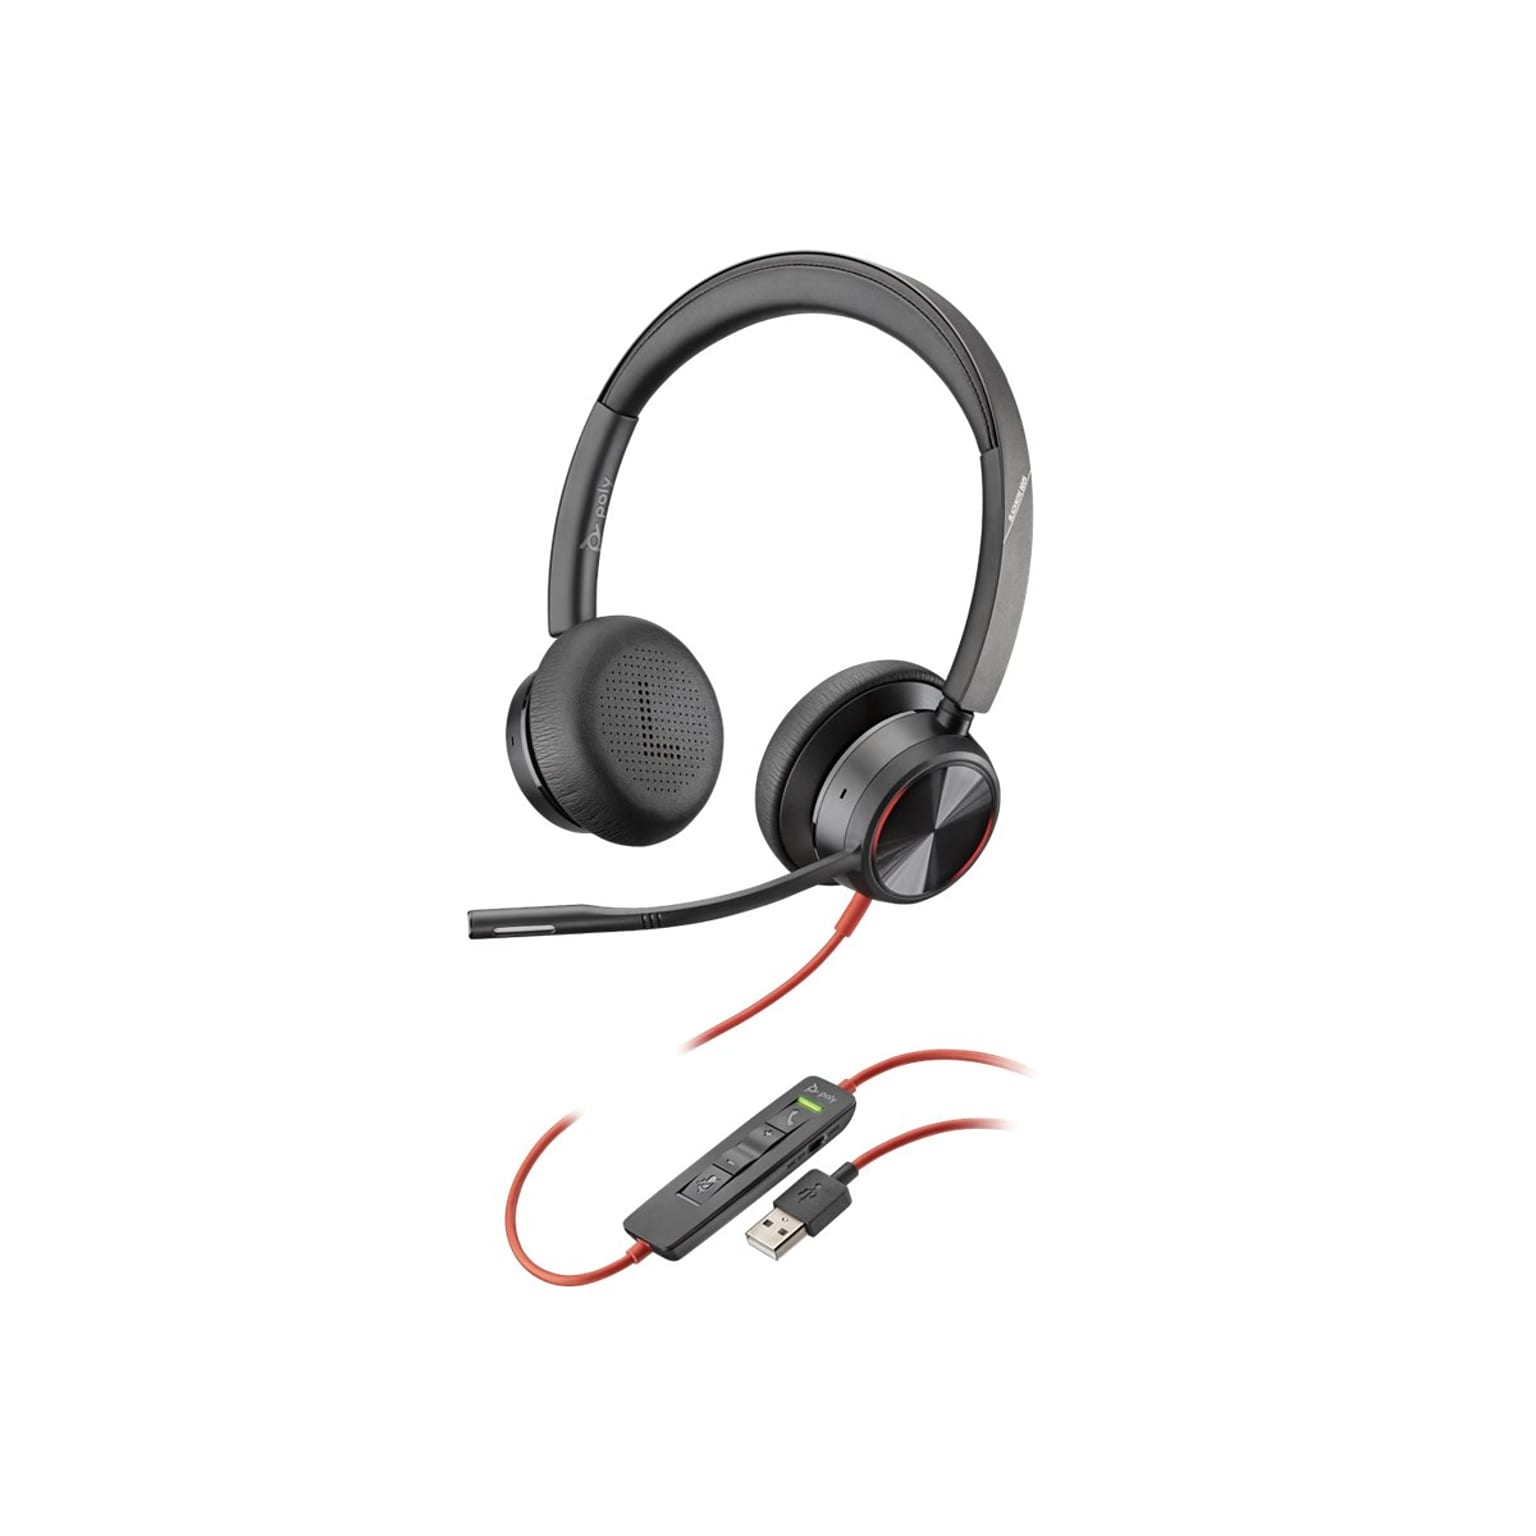 Plantronics Blackwire 8225 Wired Noise Canceling Stereo On Ear Phone & Computer Headset, Black (214406-01)